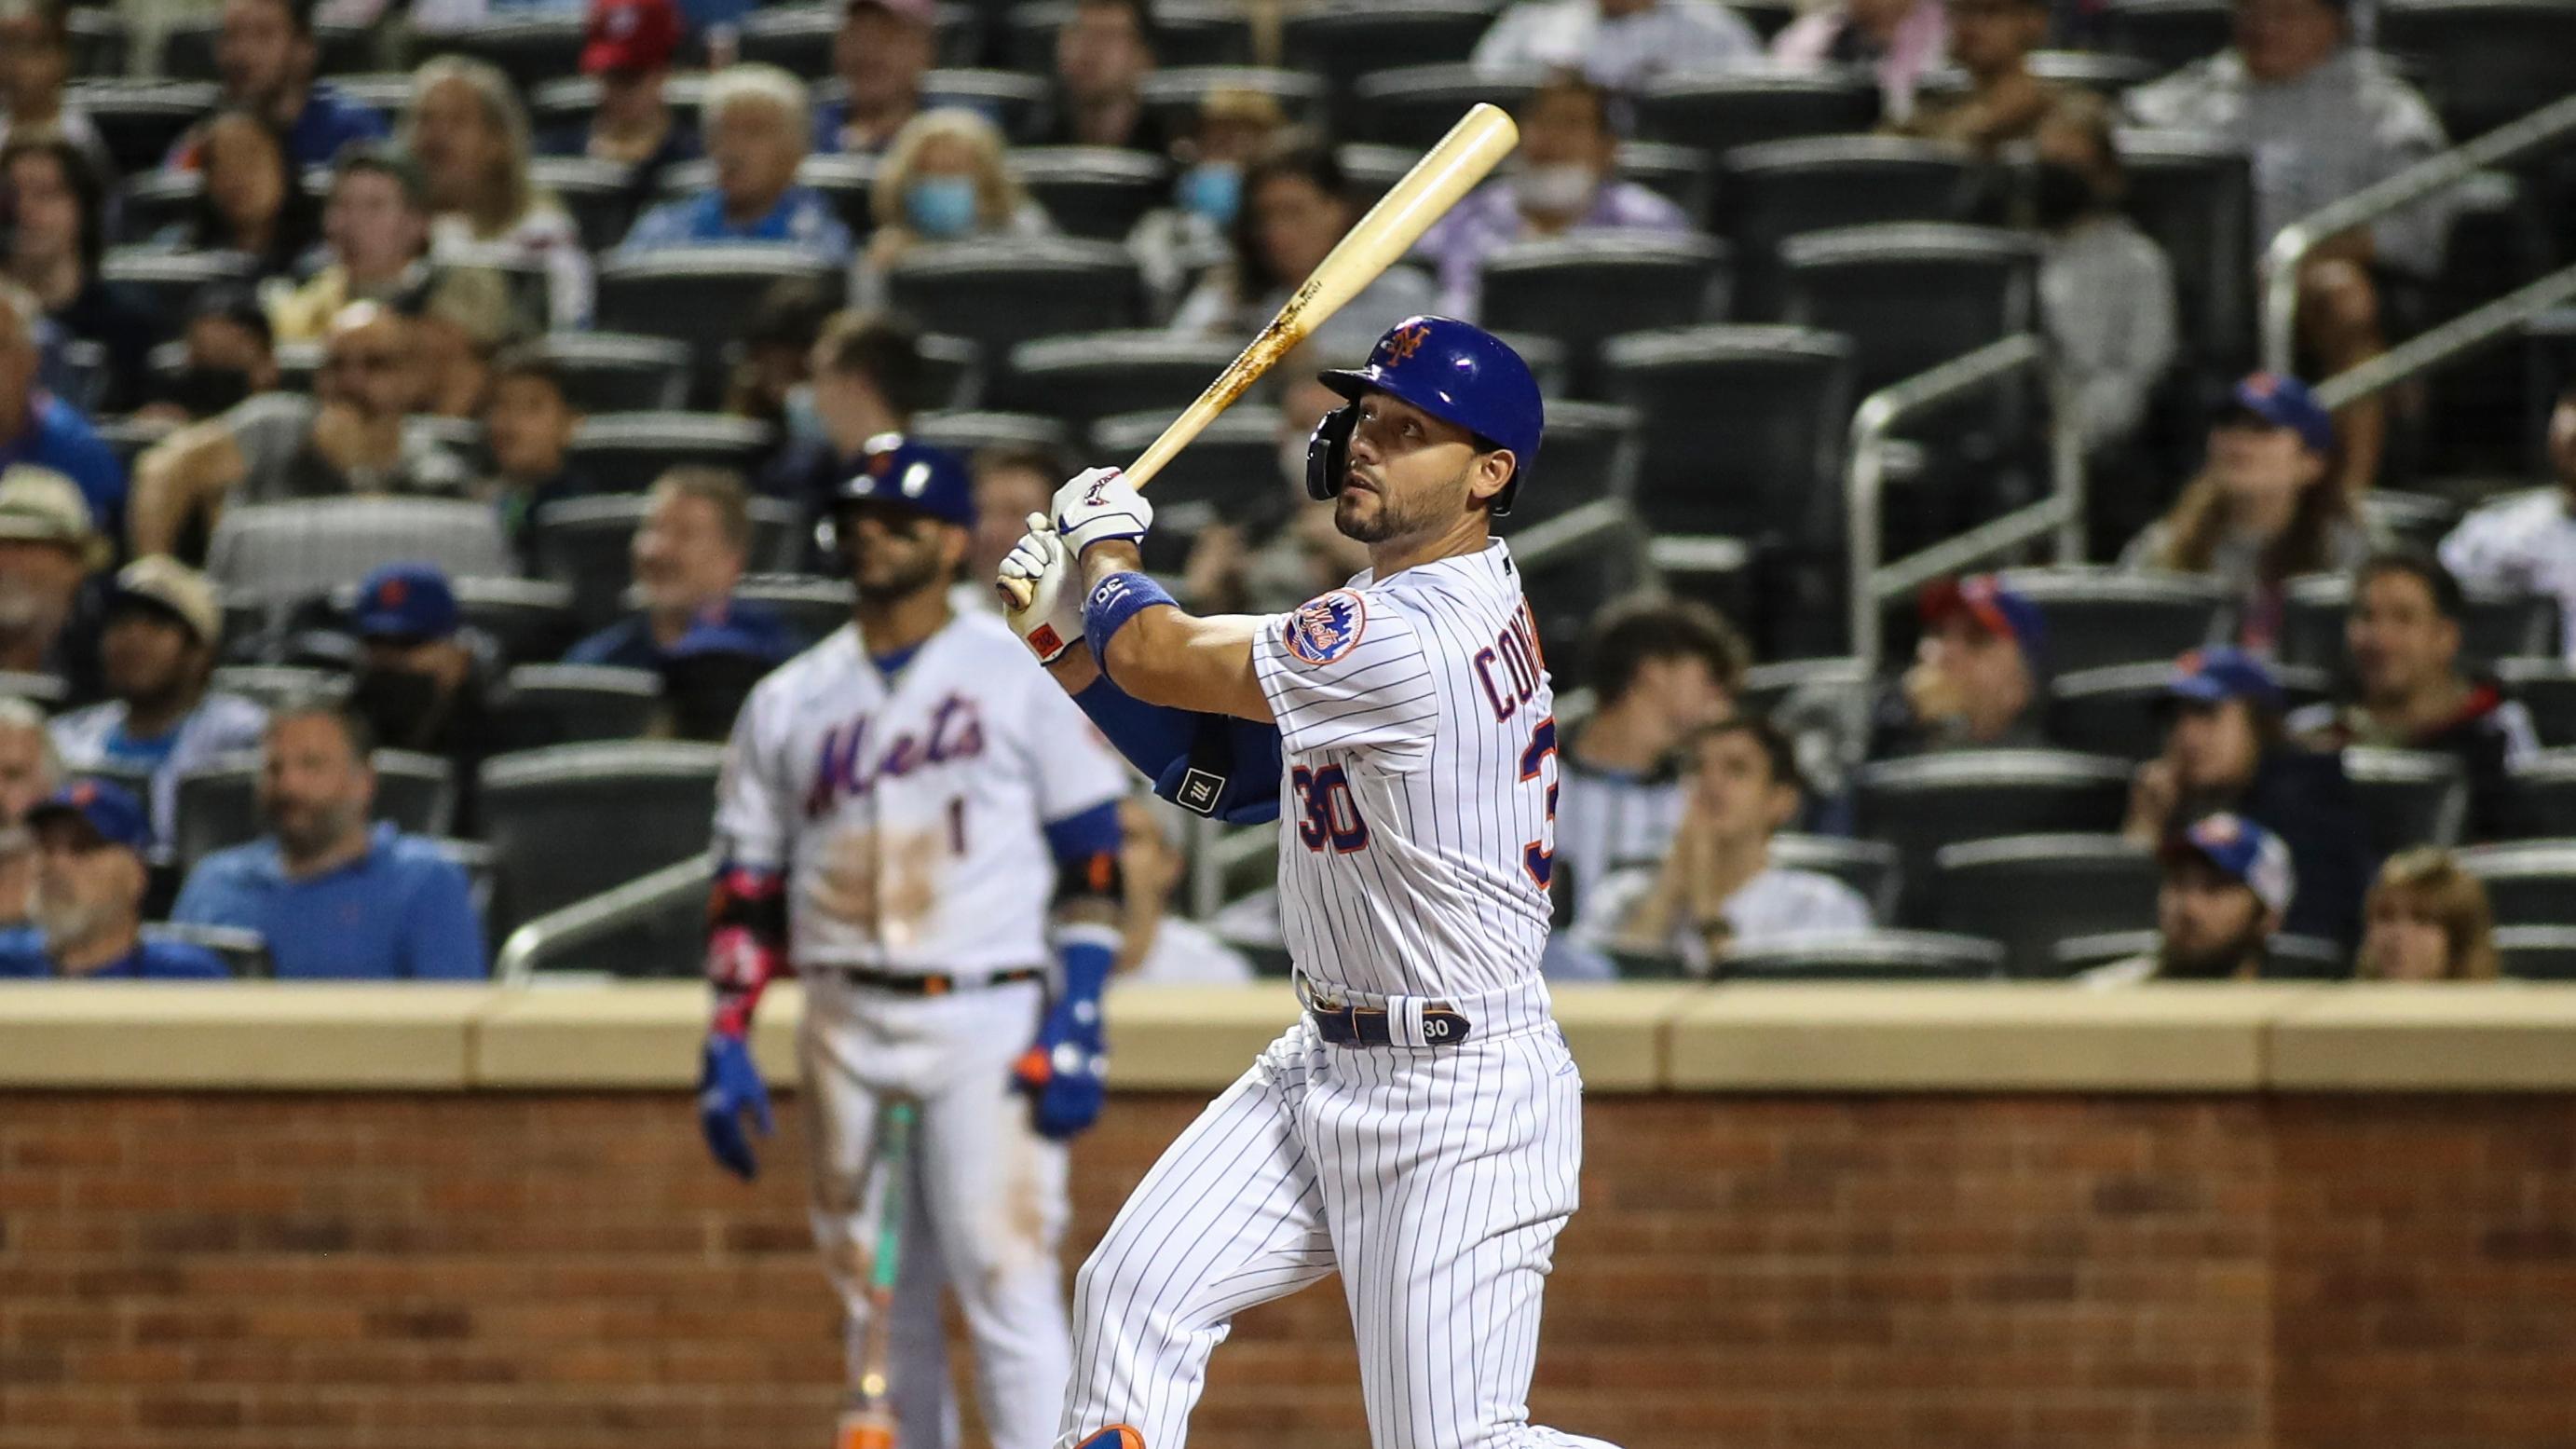 New York Mets pinch hitter Michael Conforto (30) hits a three run home run in the seventh inning against the Washington Nationals at Citi Field. / Wendell Cruz-USA TODAY Sports